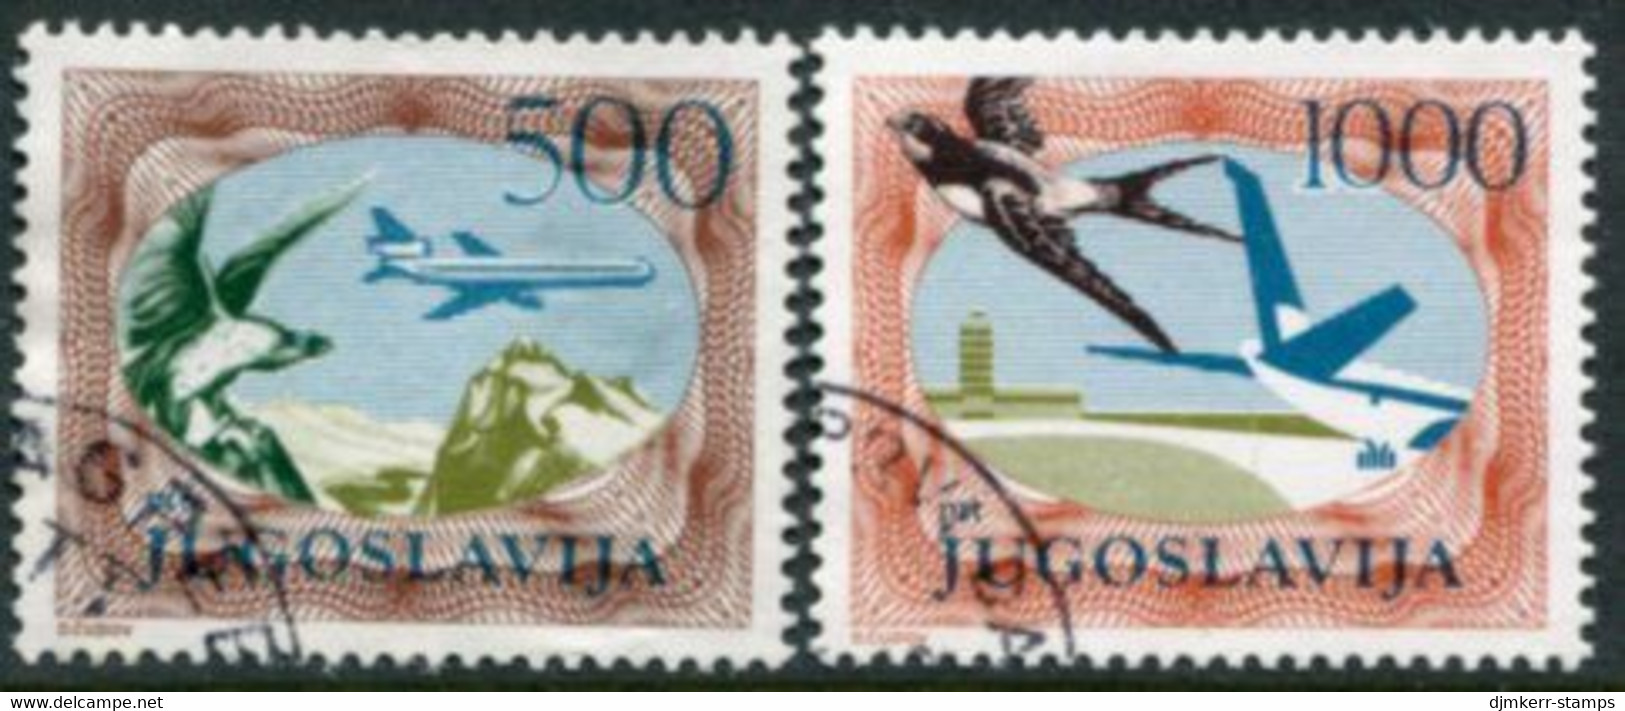 YUGOSLAVIA 1985 Airmail Definitive Perforated 12½ Used.  Michel 2098-99A - Usati